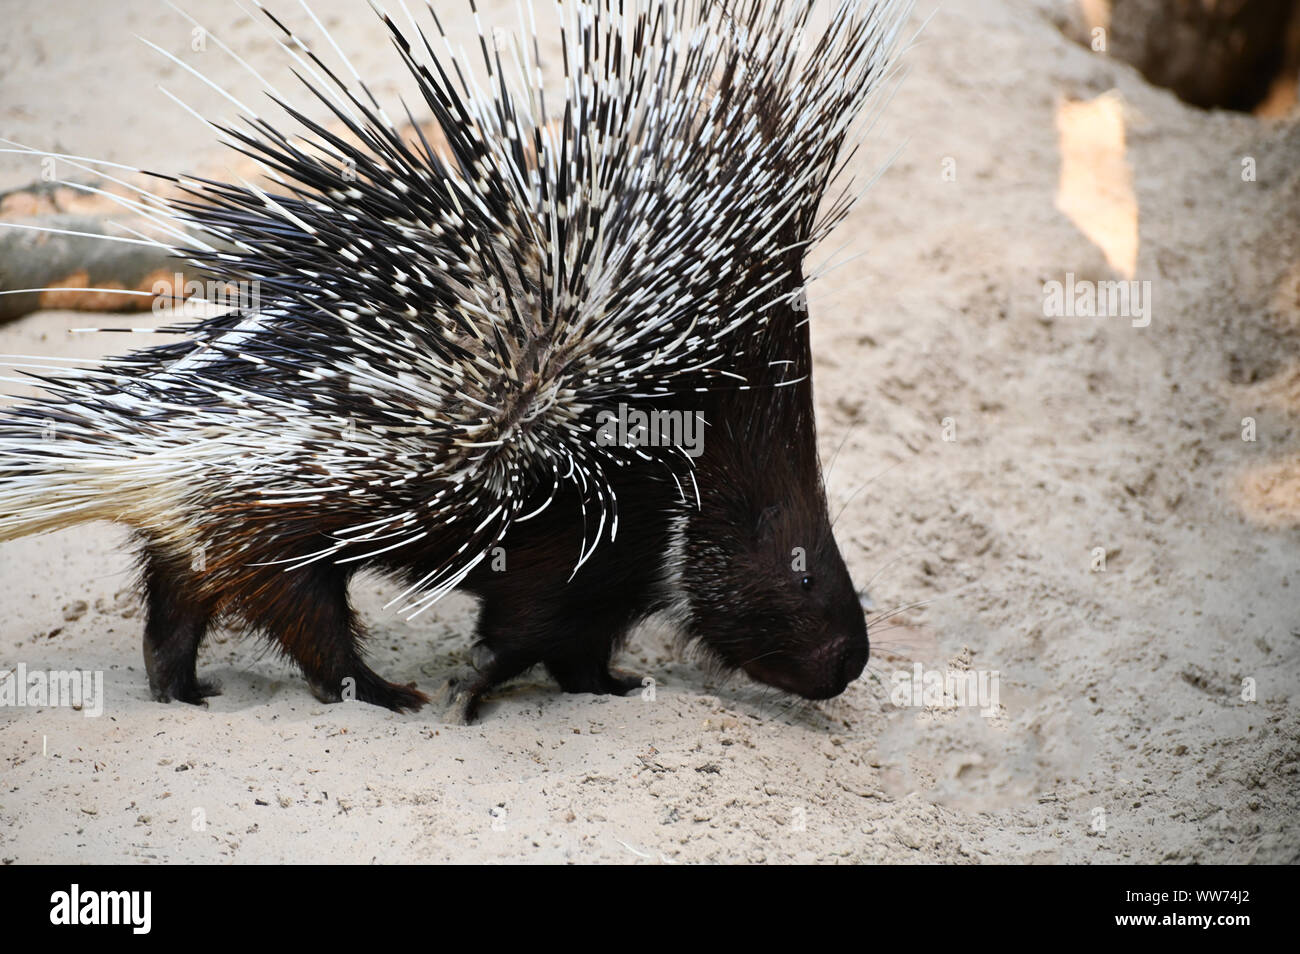 porcupine opens the back spines for defense Stock Photo